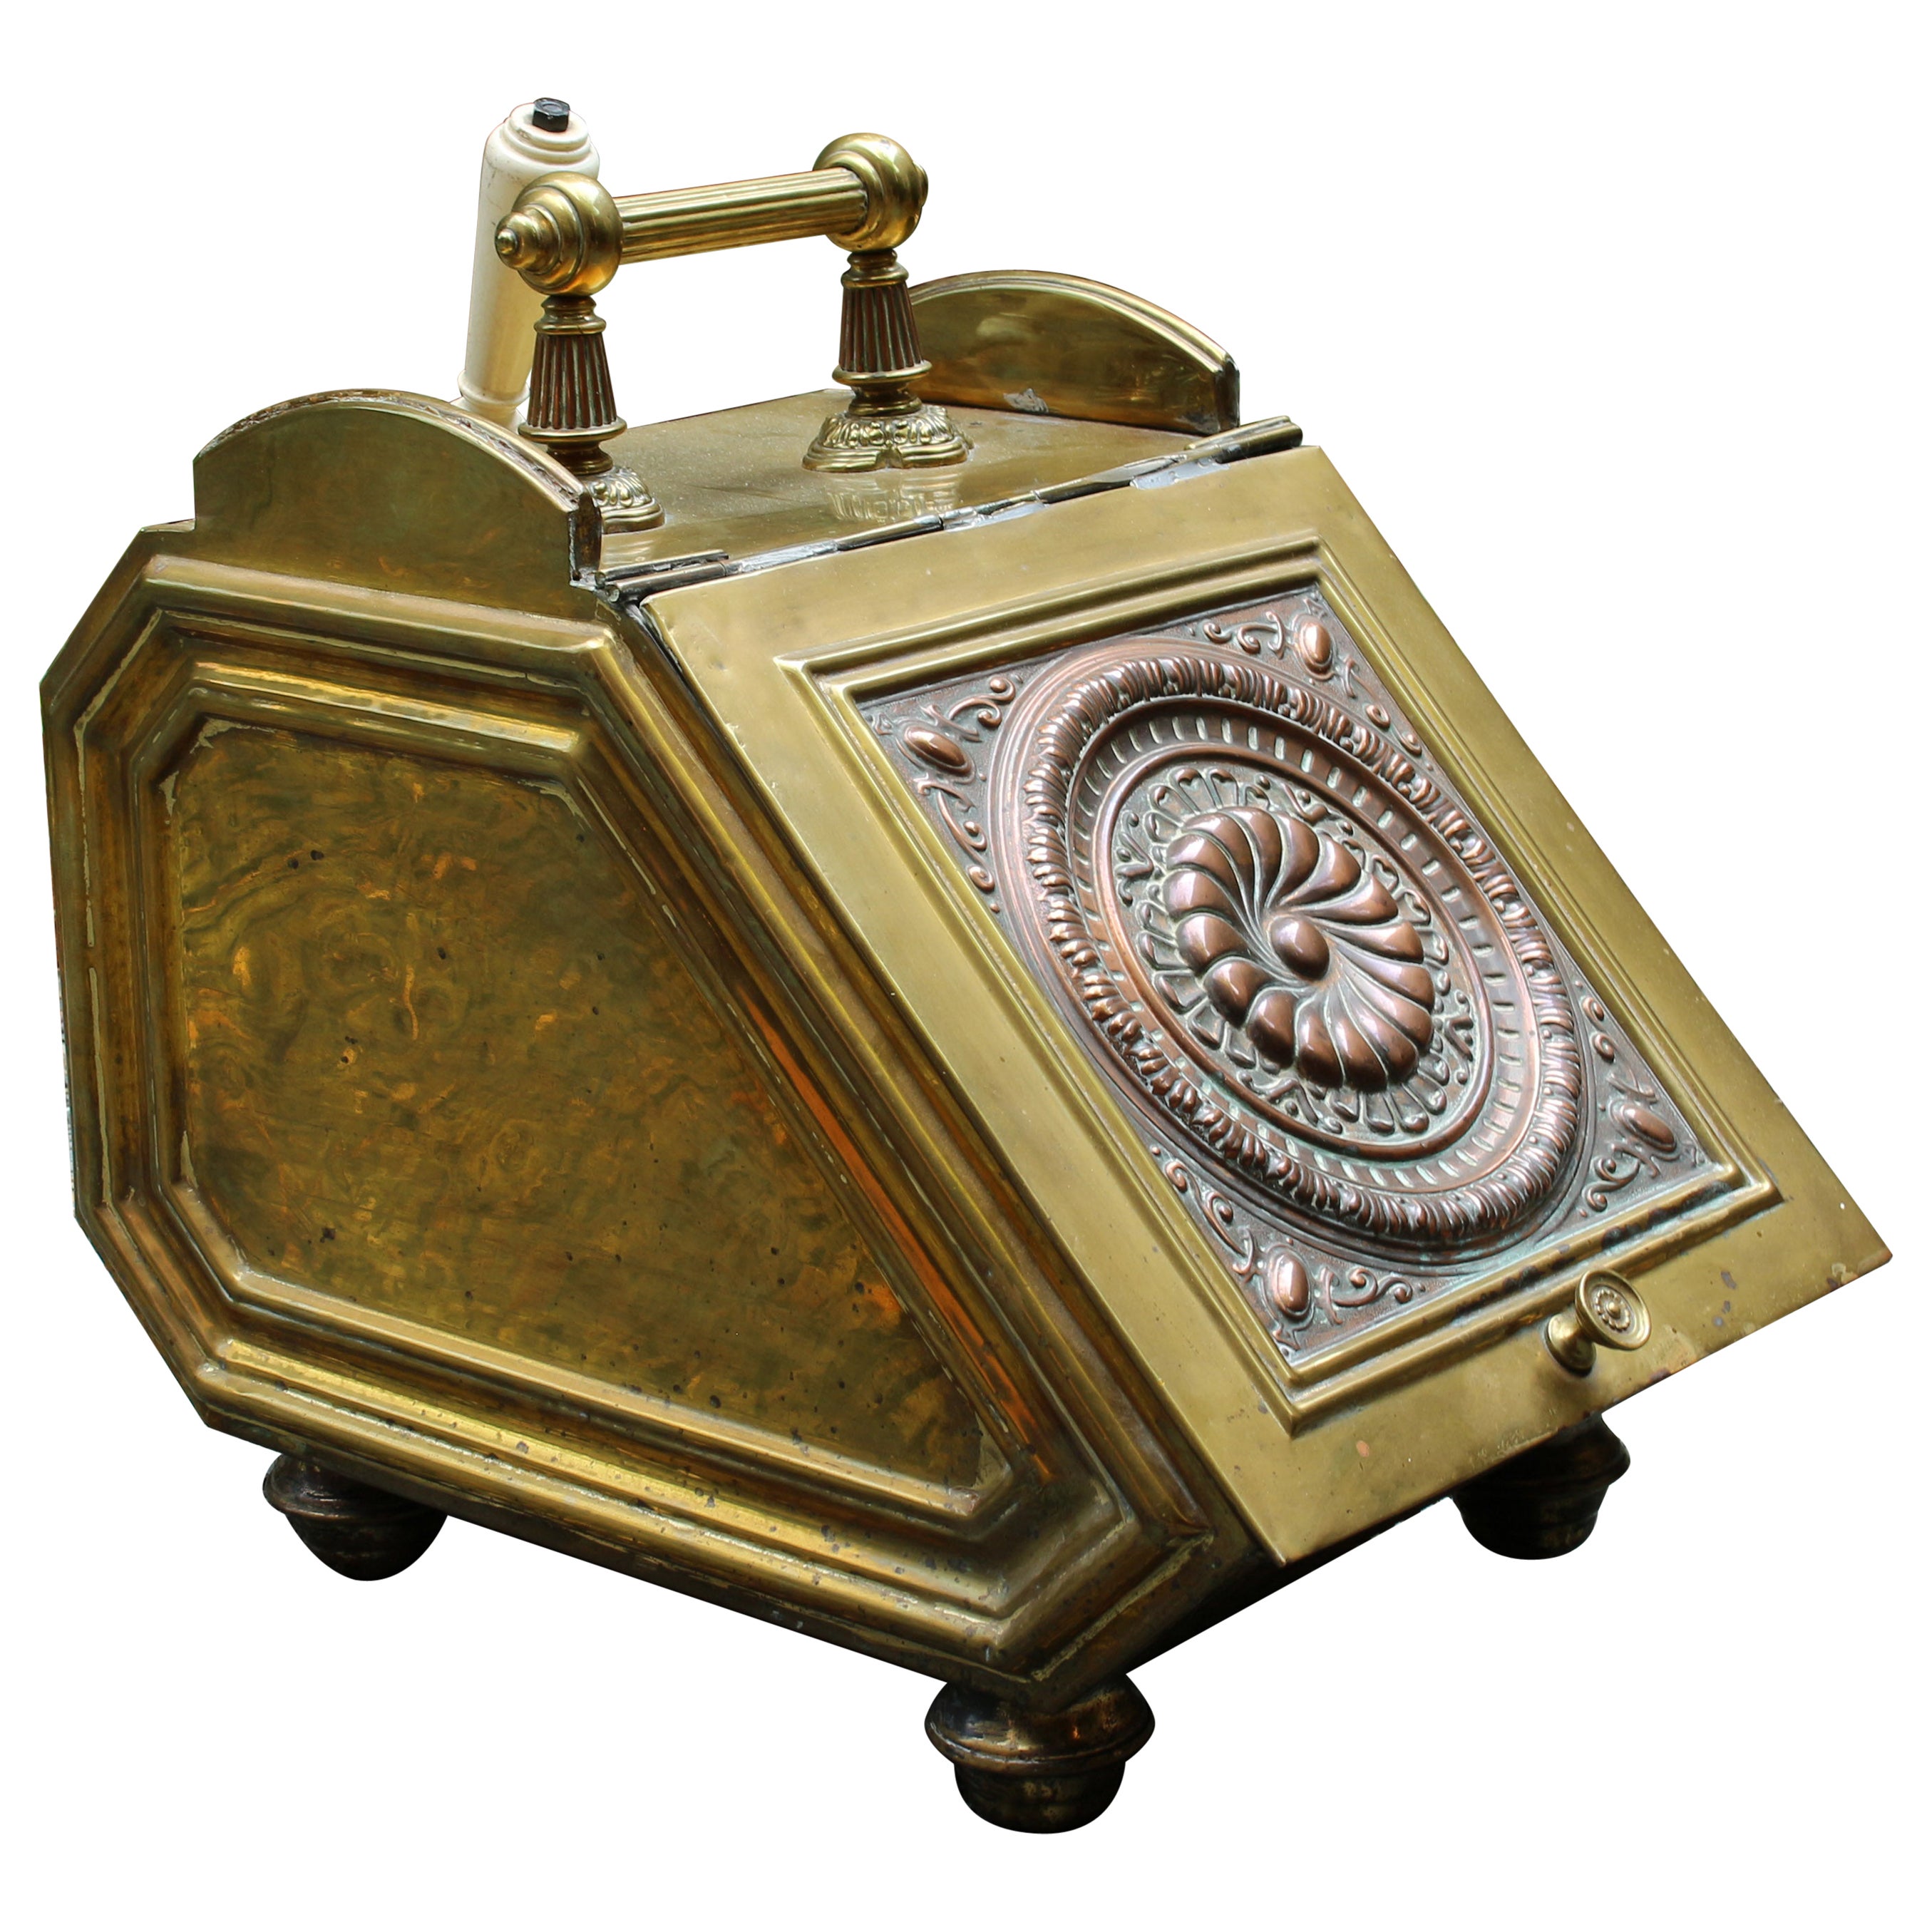 Classical Design English Brass and Copper Coal Hod